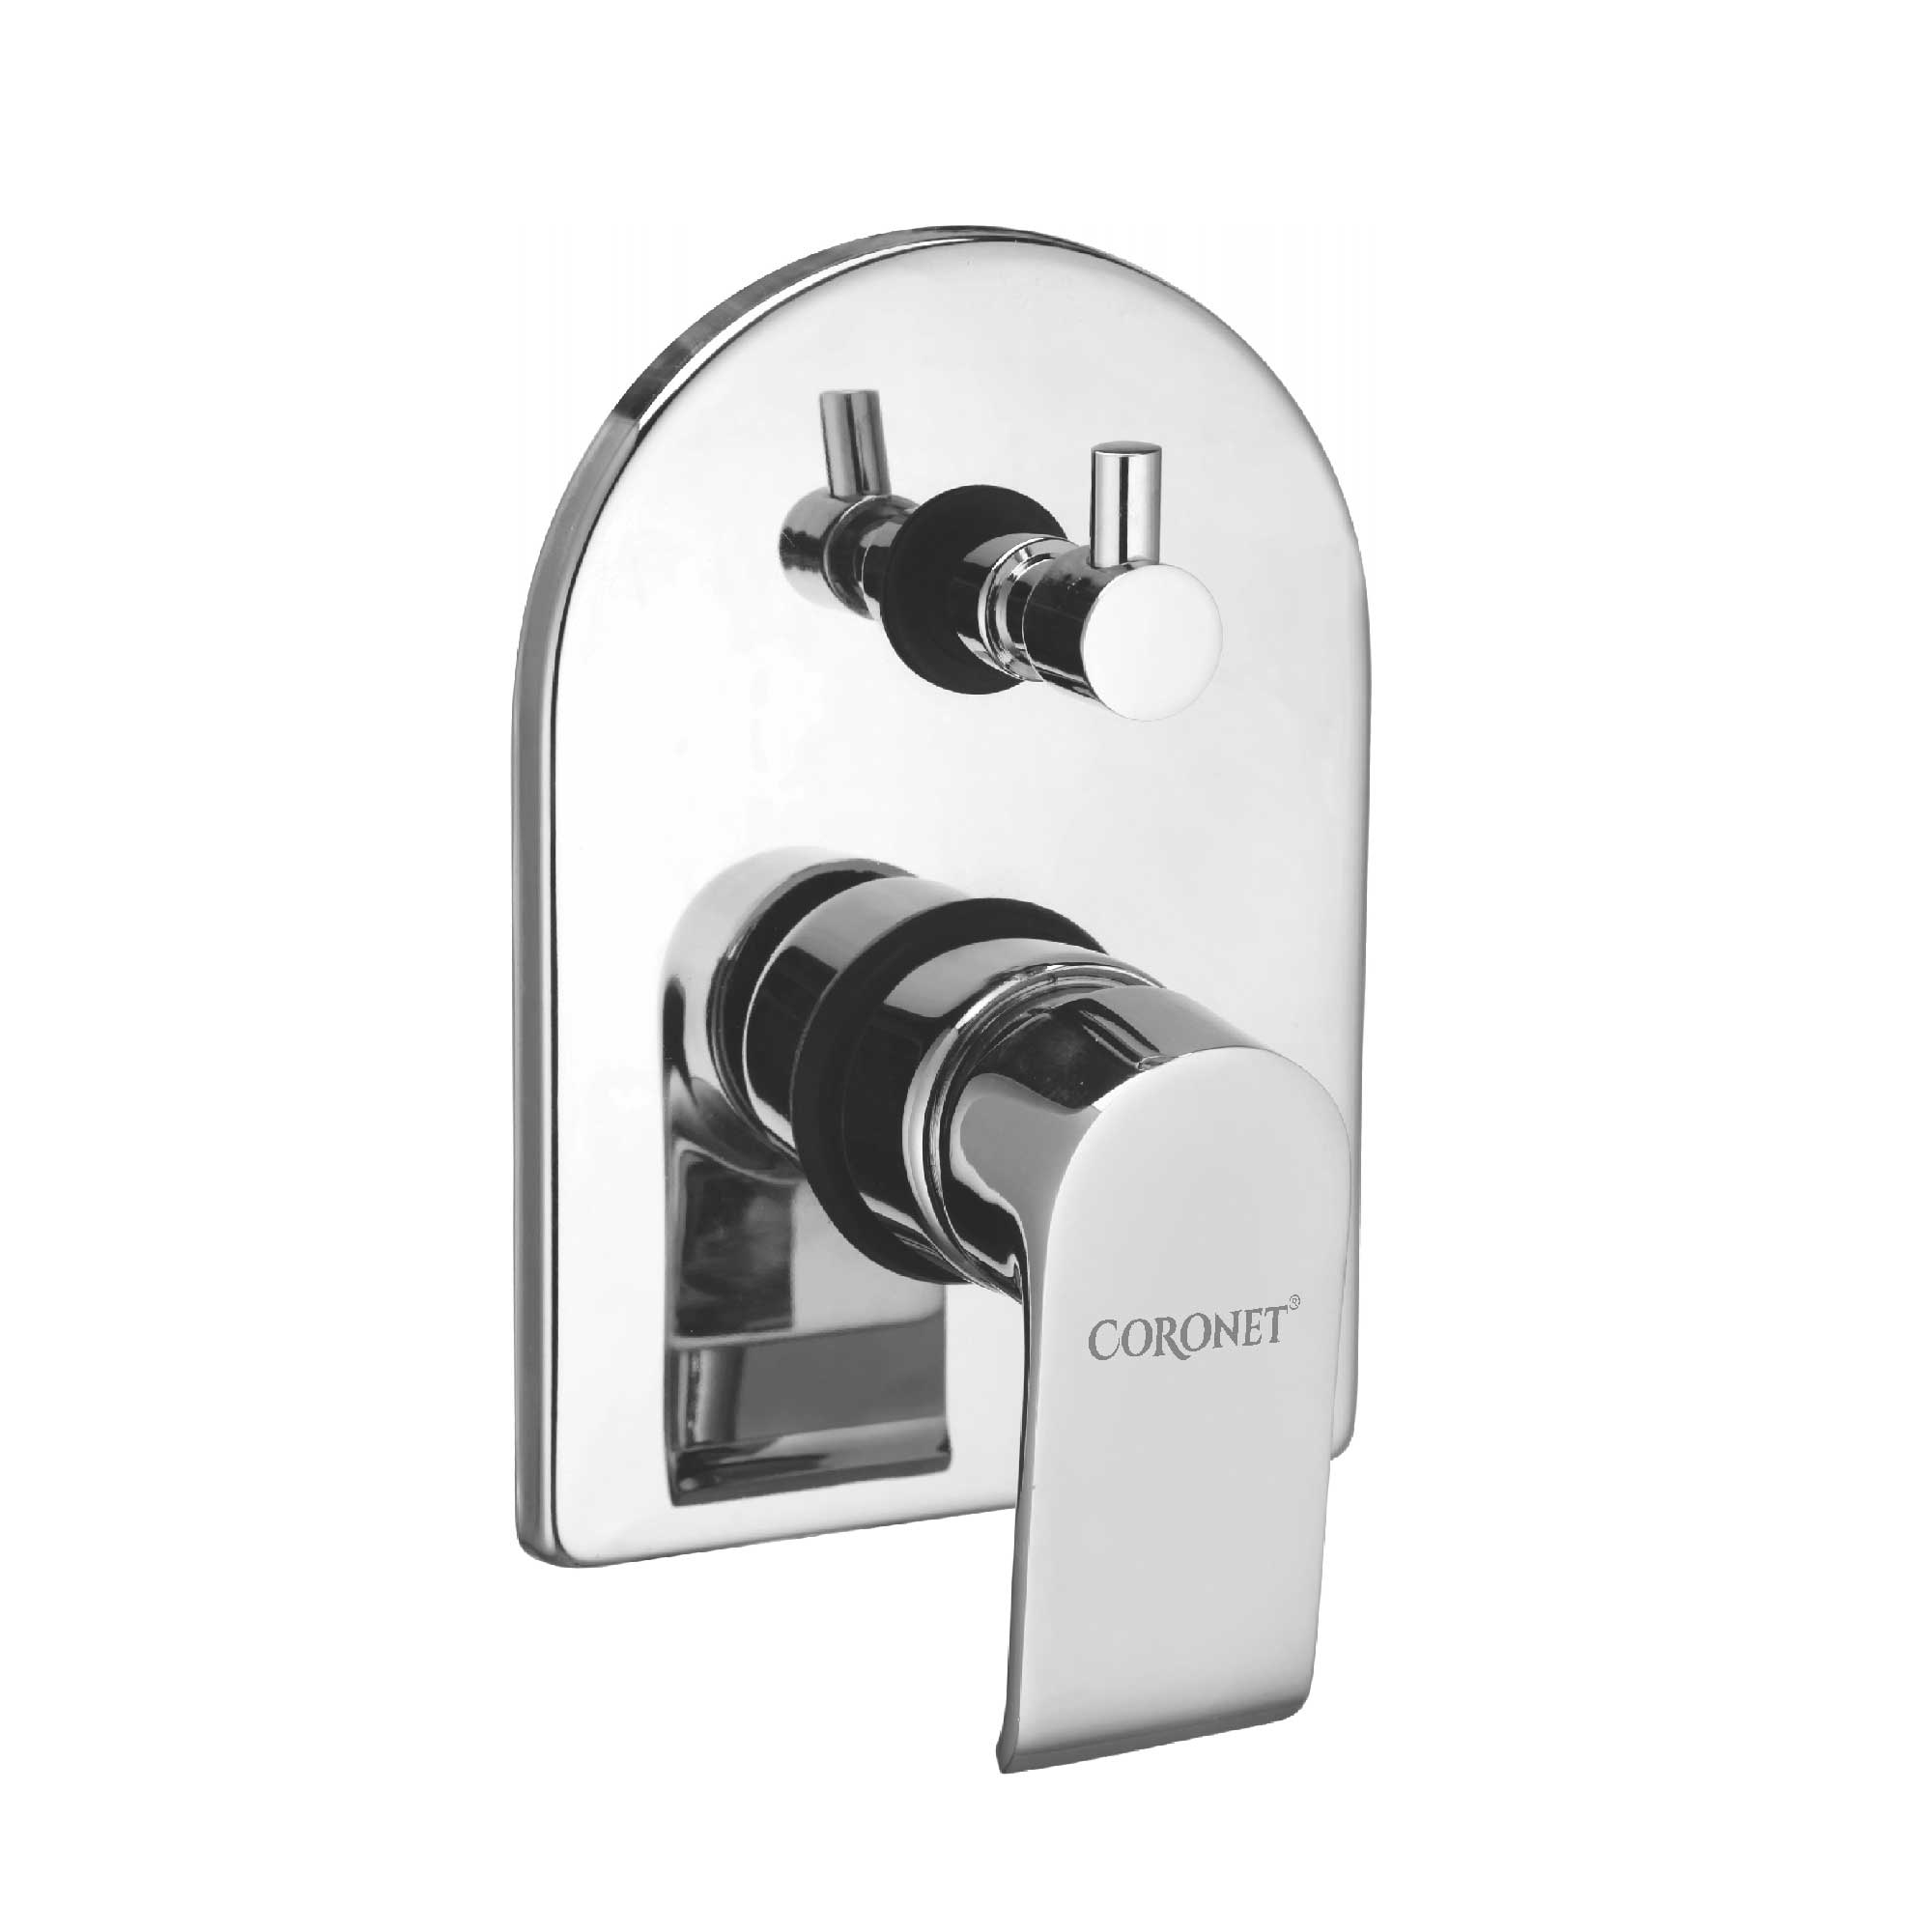 Single Lever Sink Mixer Wall Mounted 